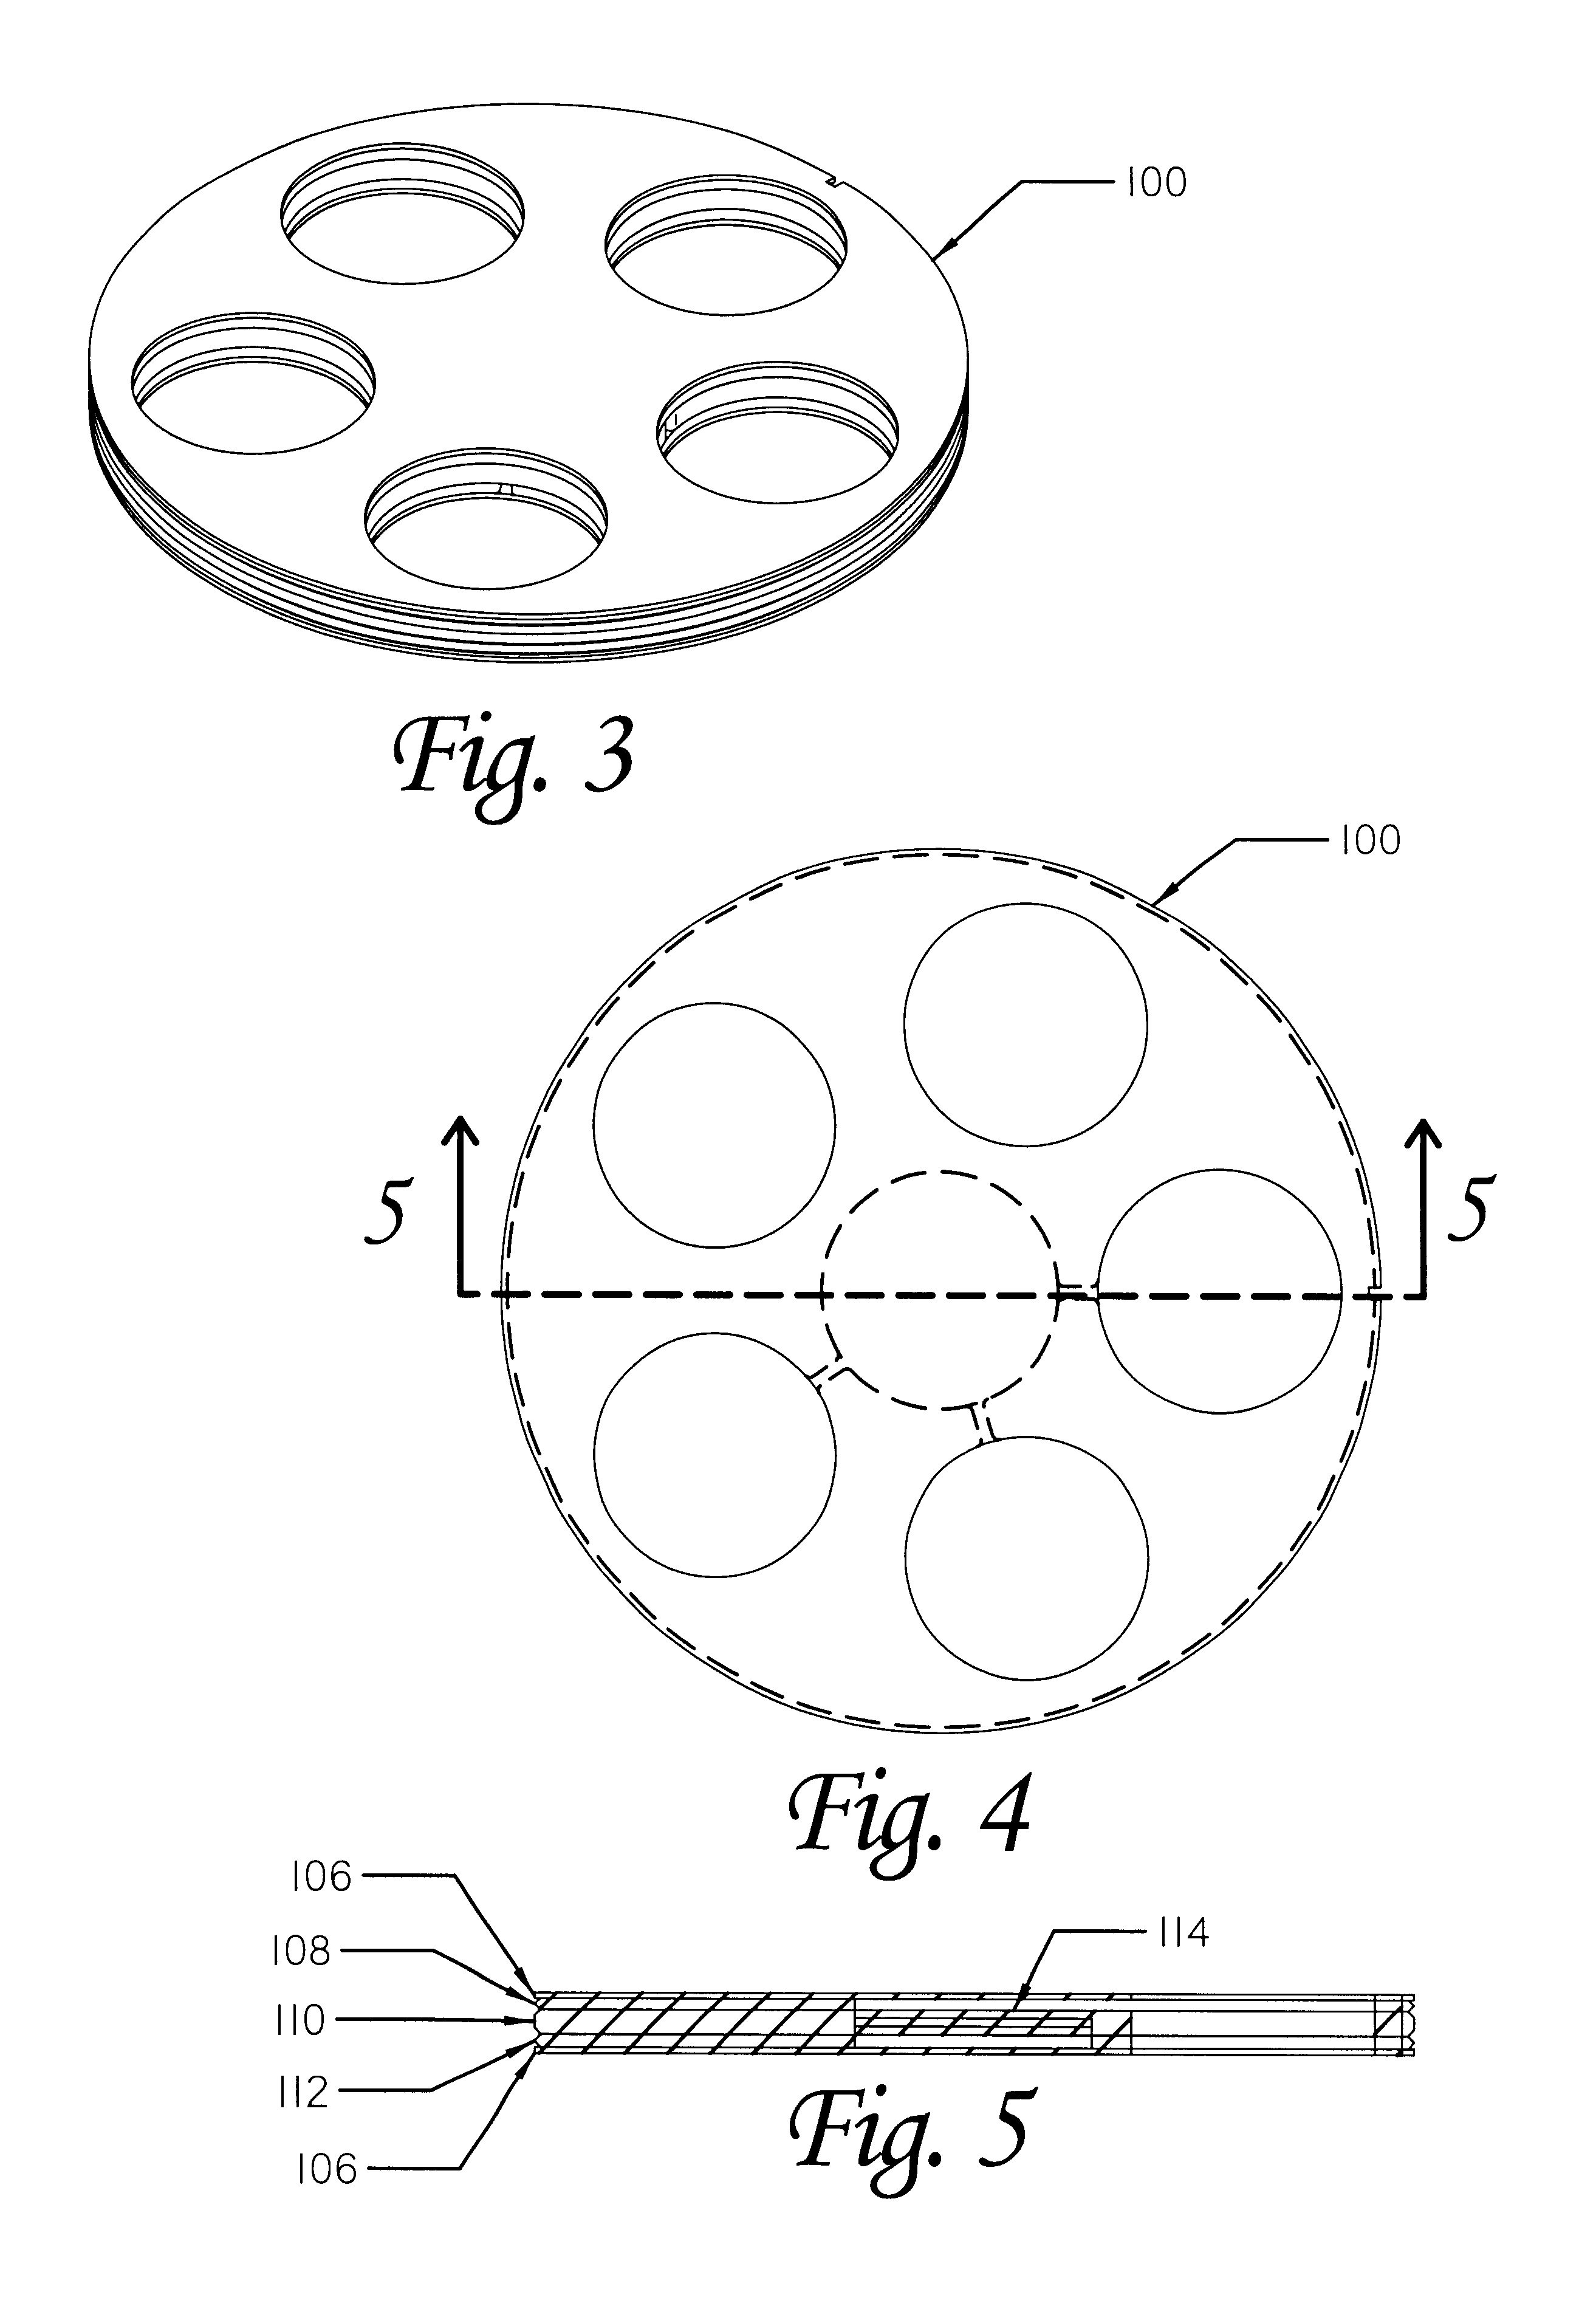 Apparatus and method for heating subterranean formations using fuel cells